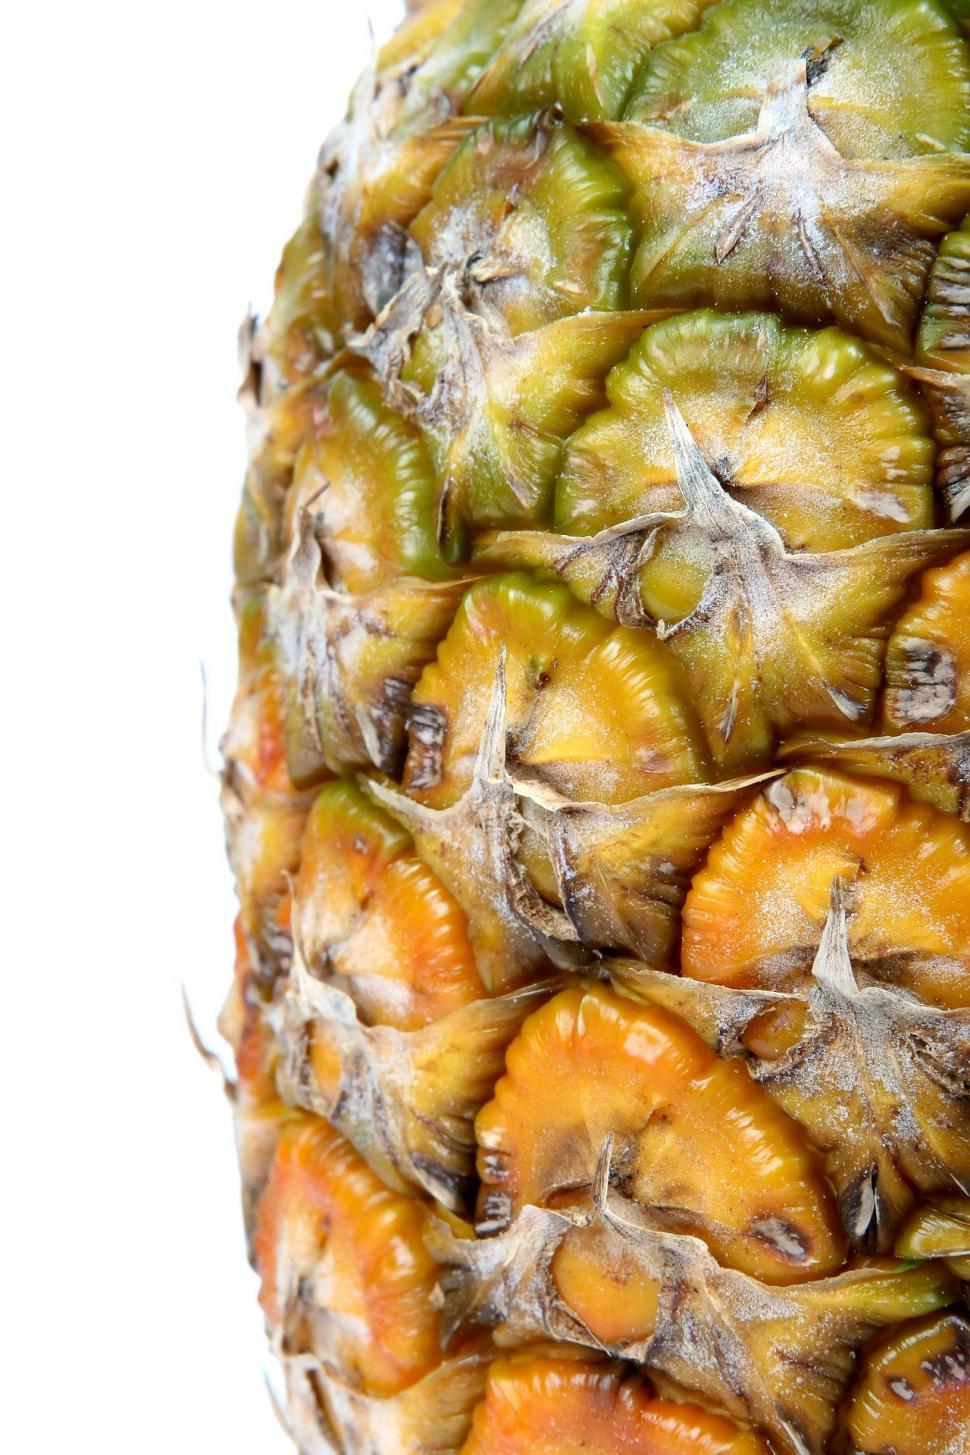 Free Image of Close Up of a Pineapple on a White Background 